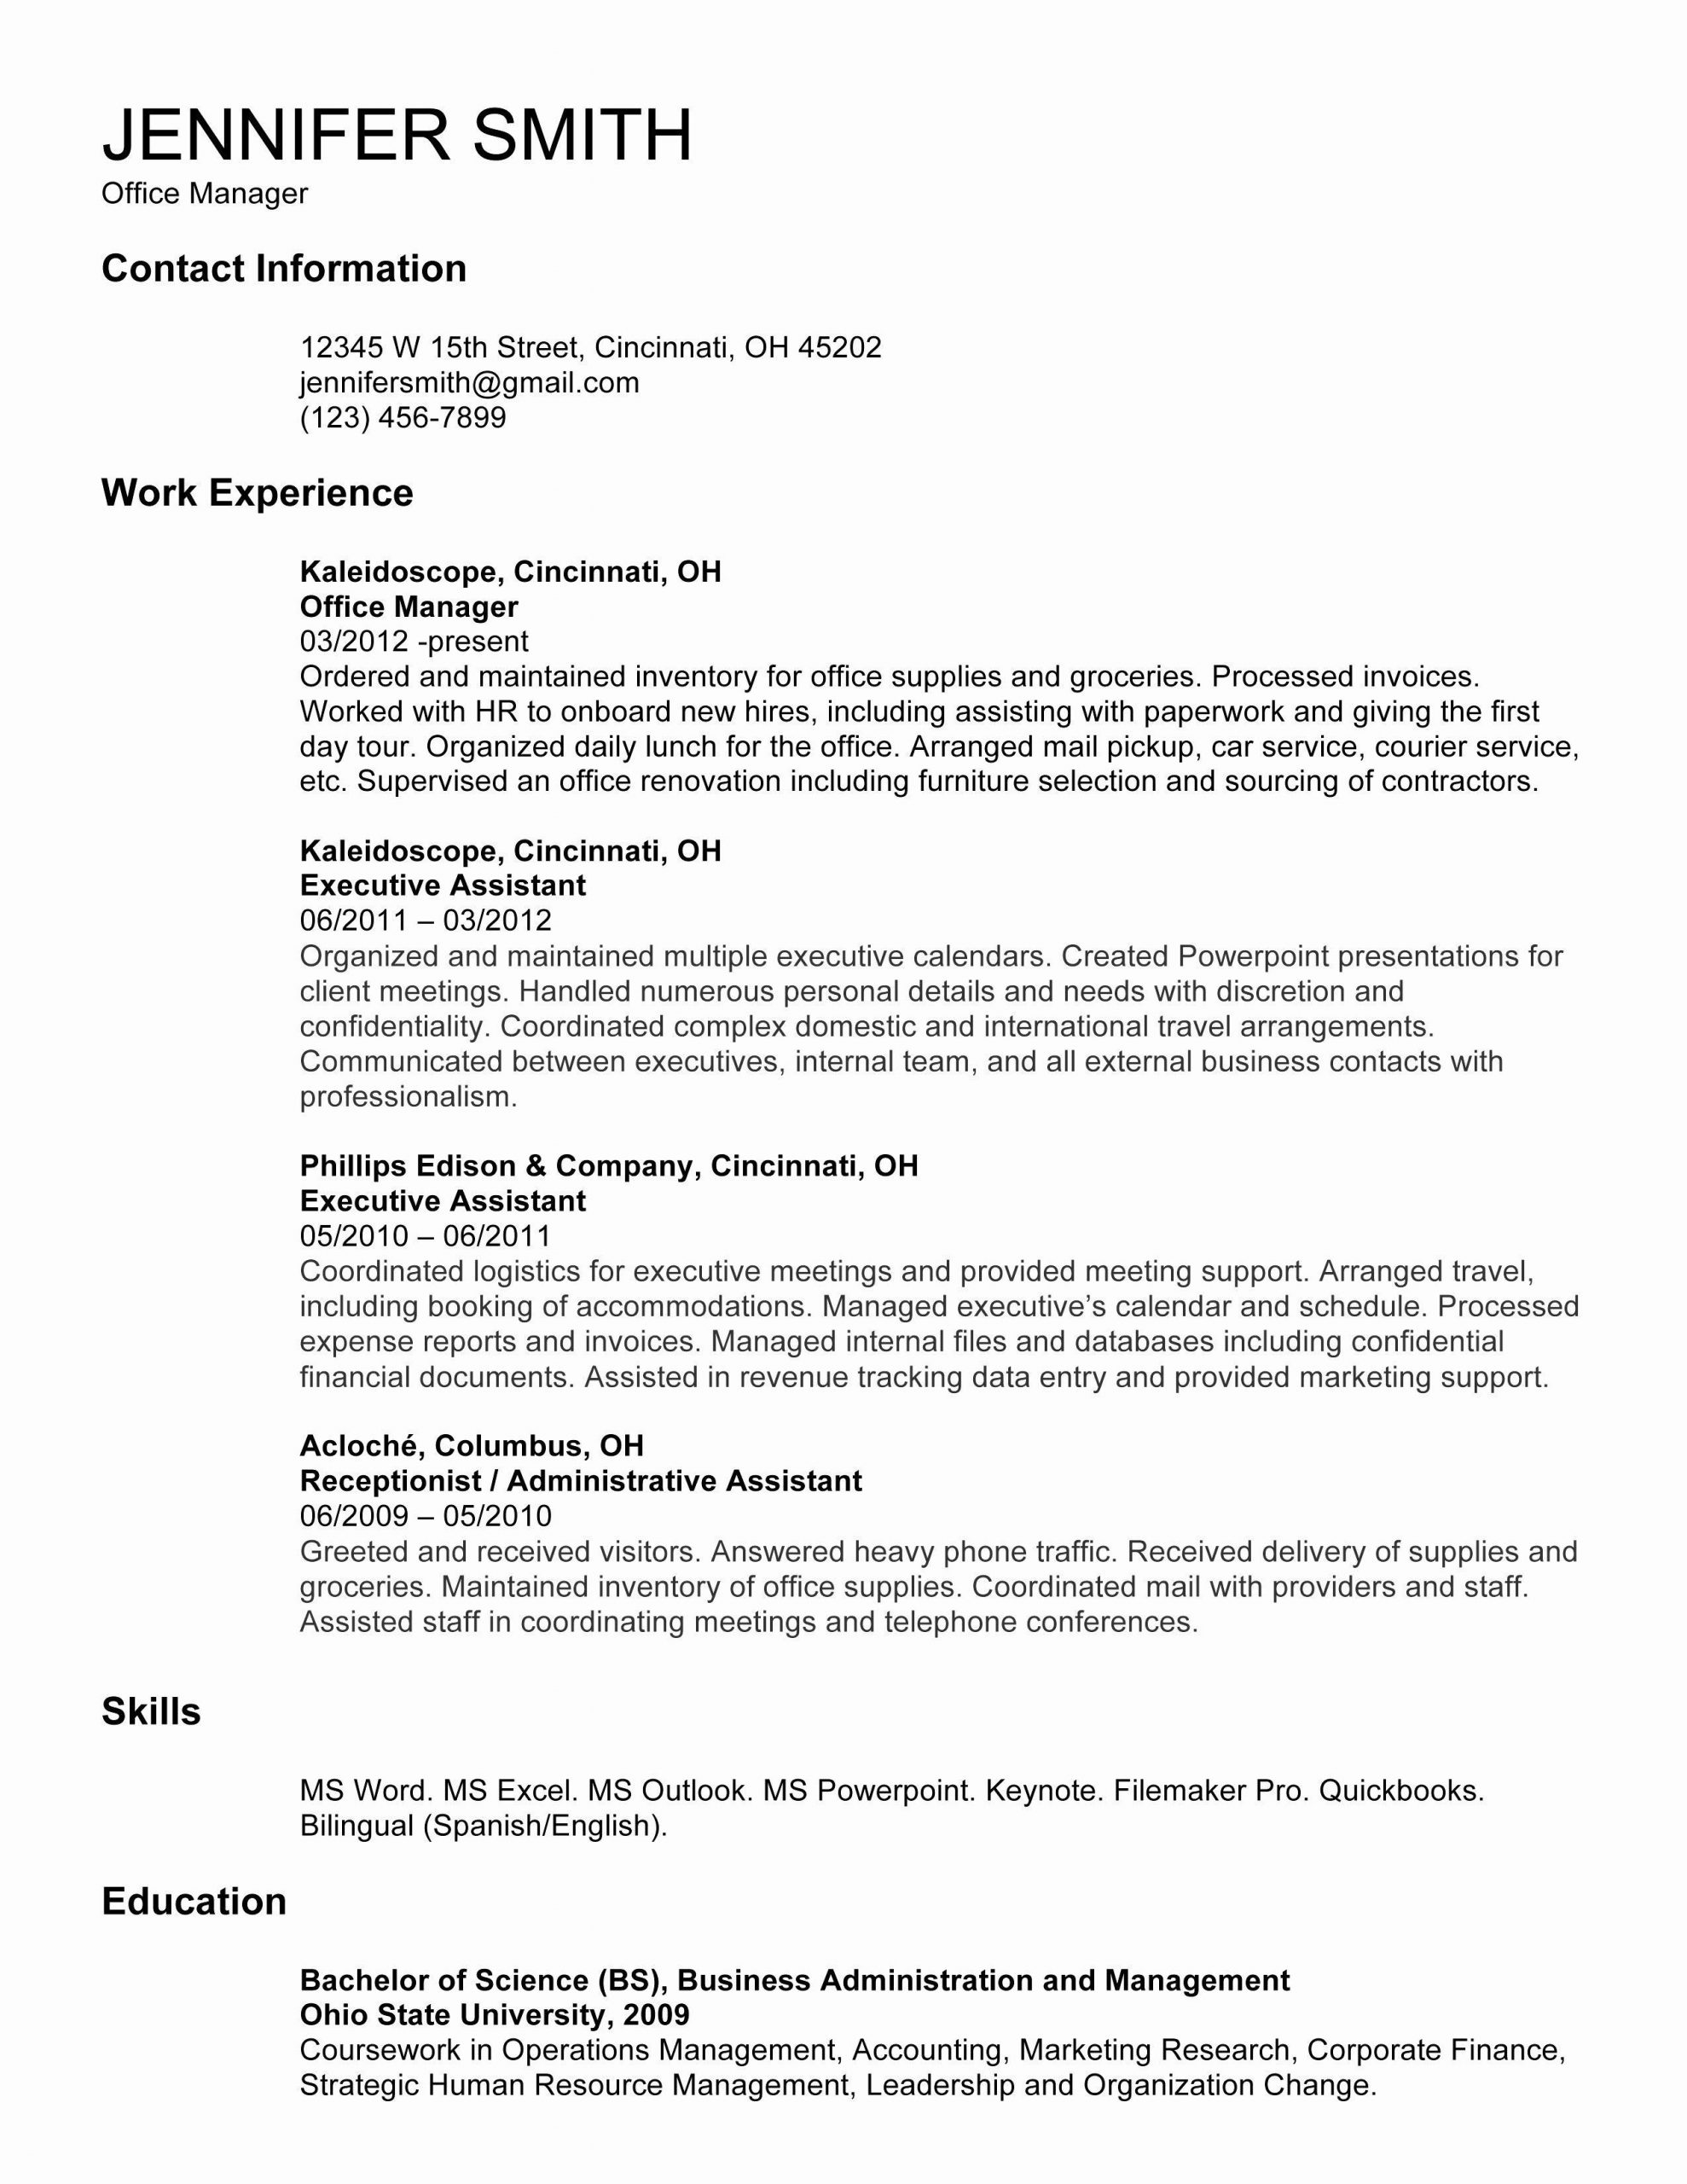 Sample Resume for Banking and Finance Fresh Graduate 77 Beautiful Gallery Of Sample Resume for Financial Management …